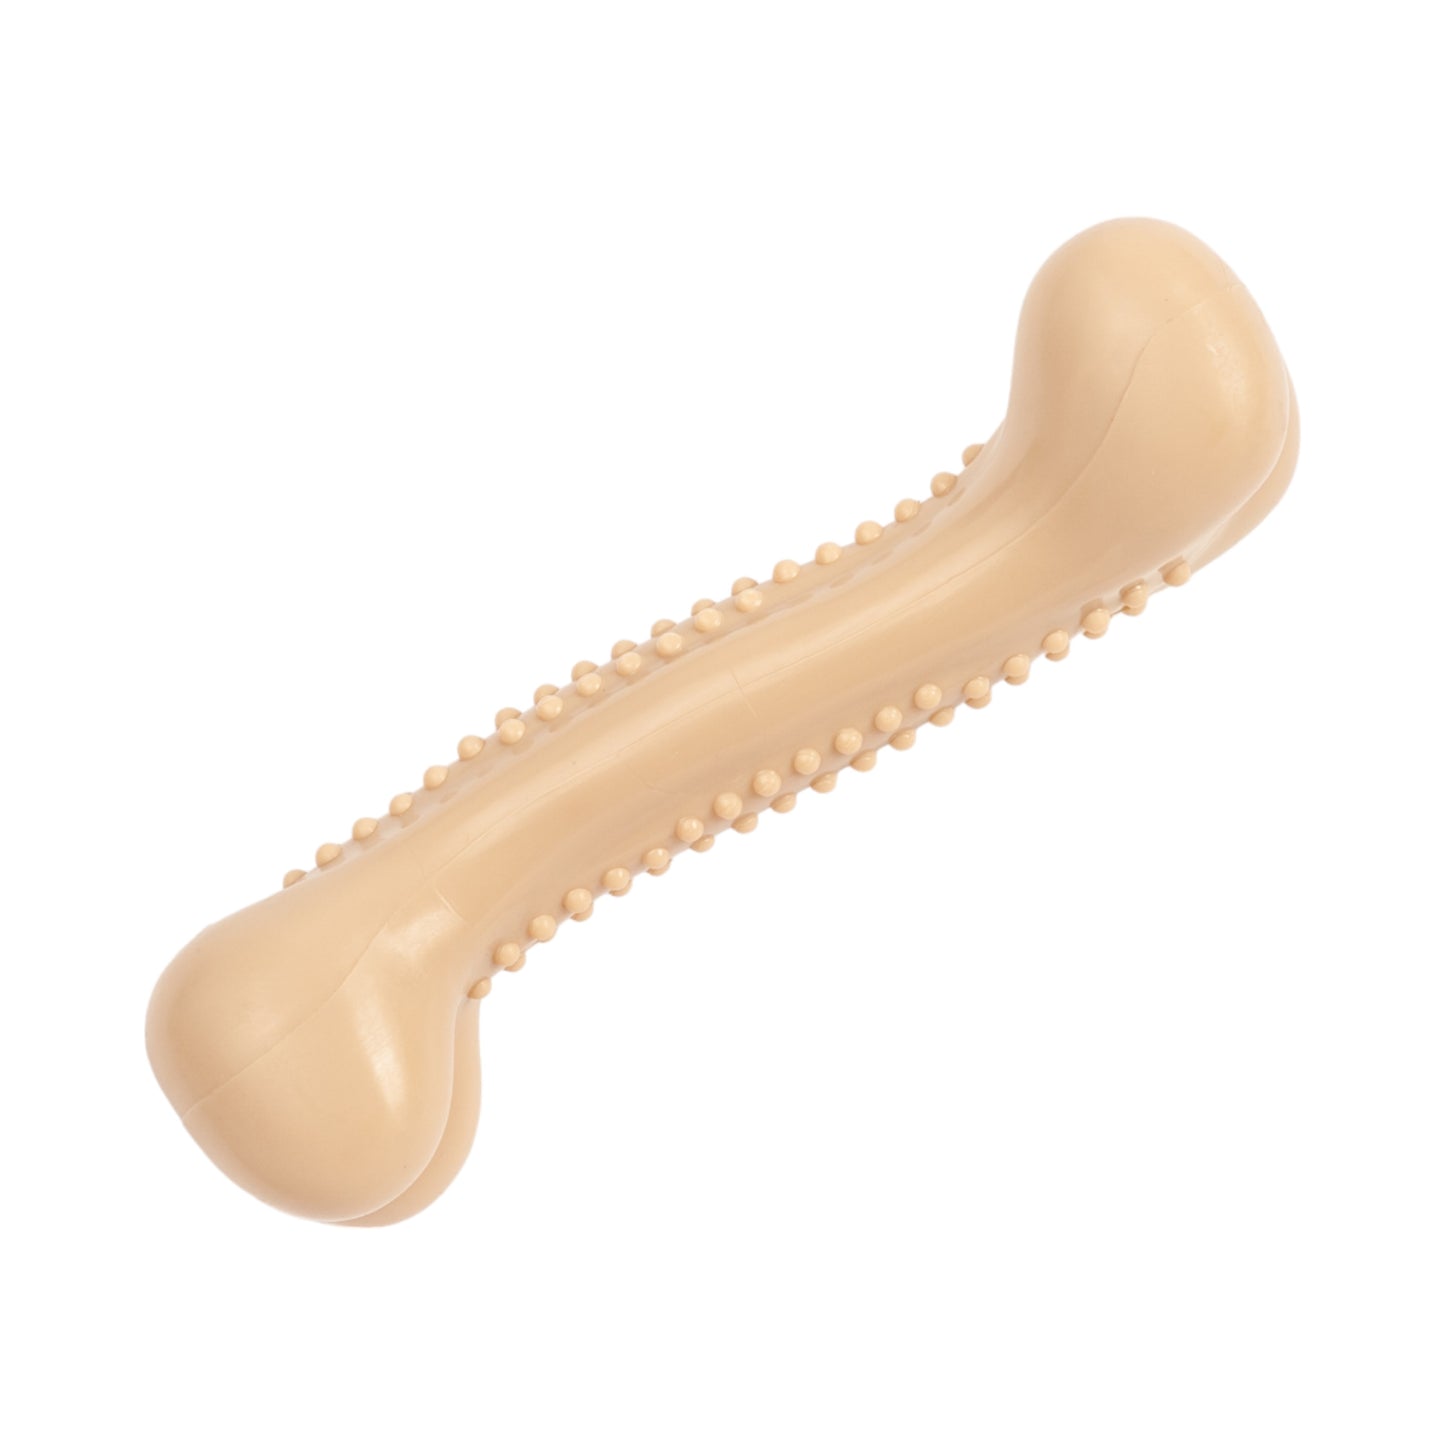 Country Living Nylon Chew Dog Bone Toy - Chicken Flavored